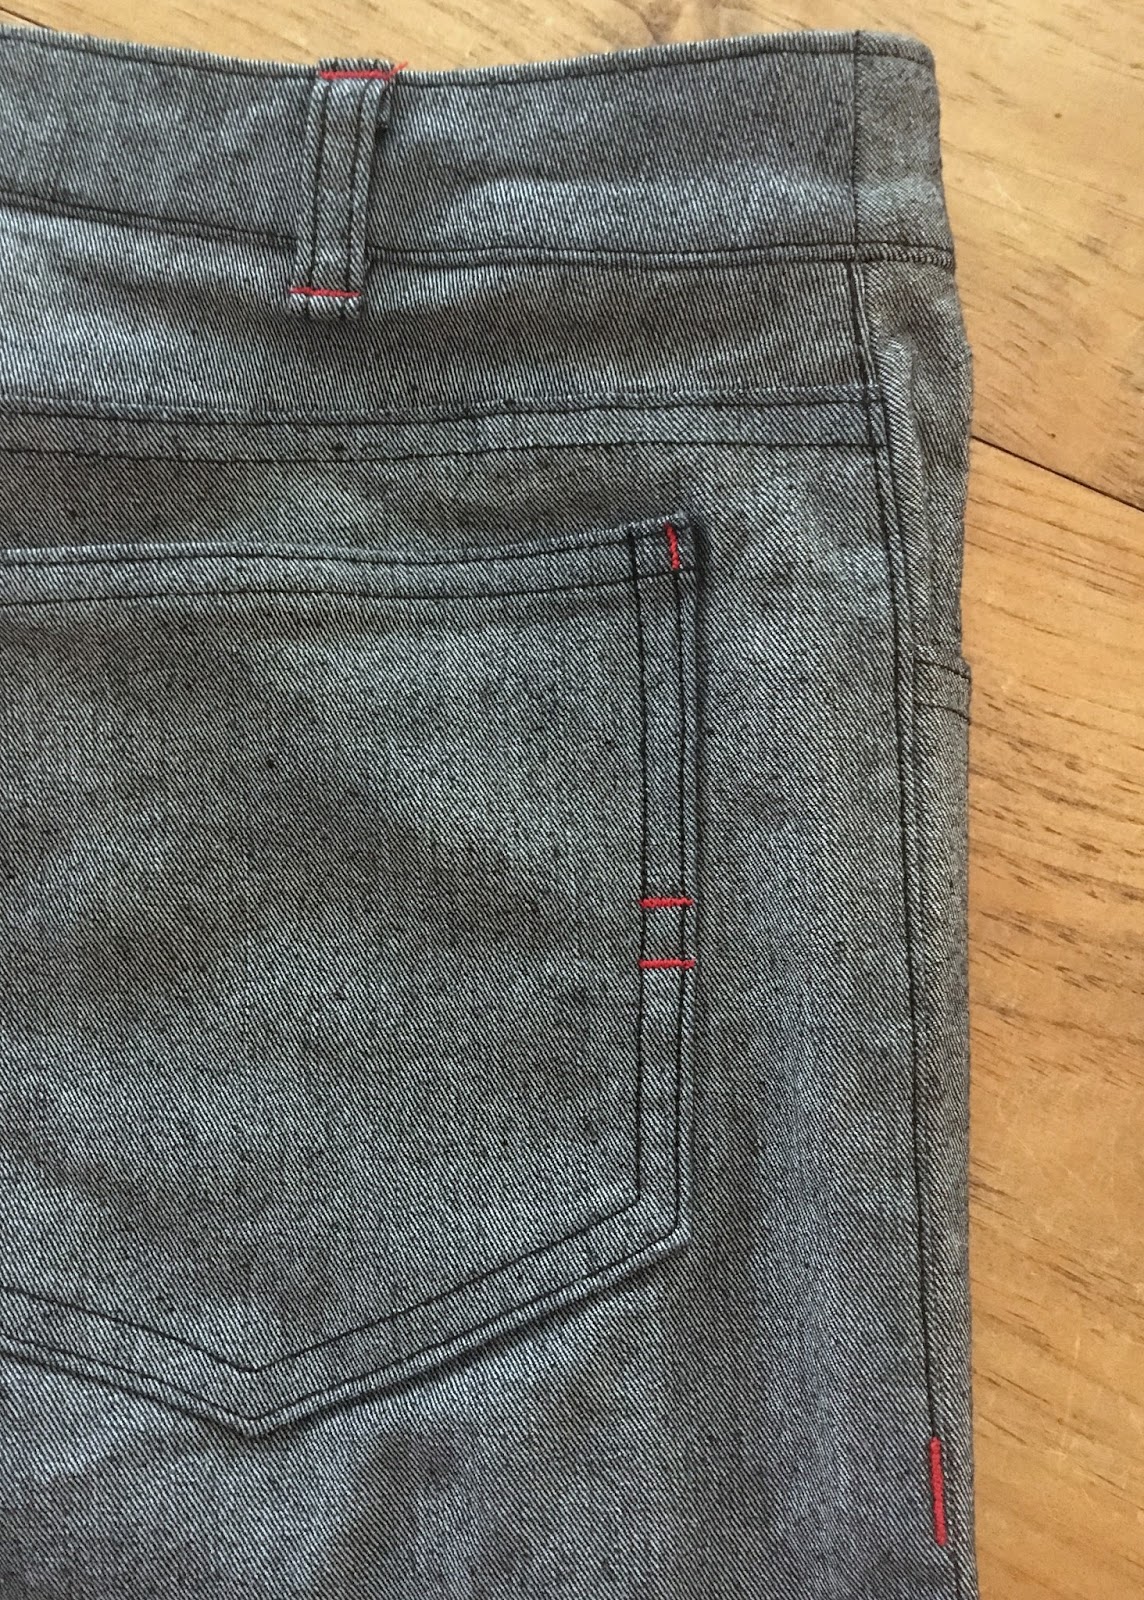 Cookin' & Craftin': Testing, testing: Cashmerette Ames Jeans